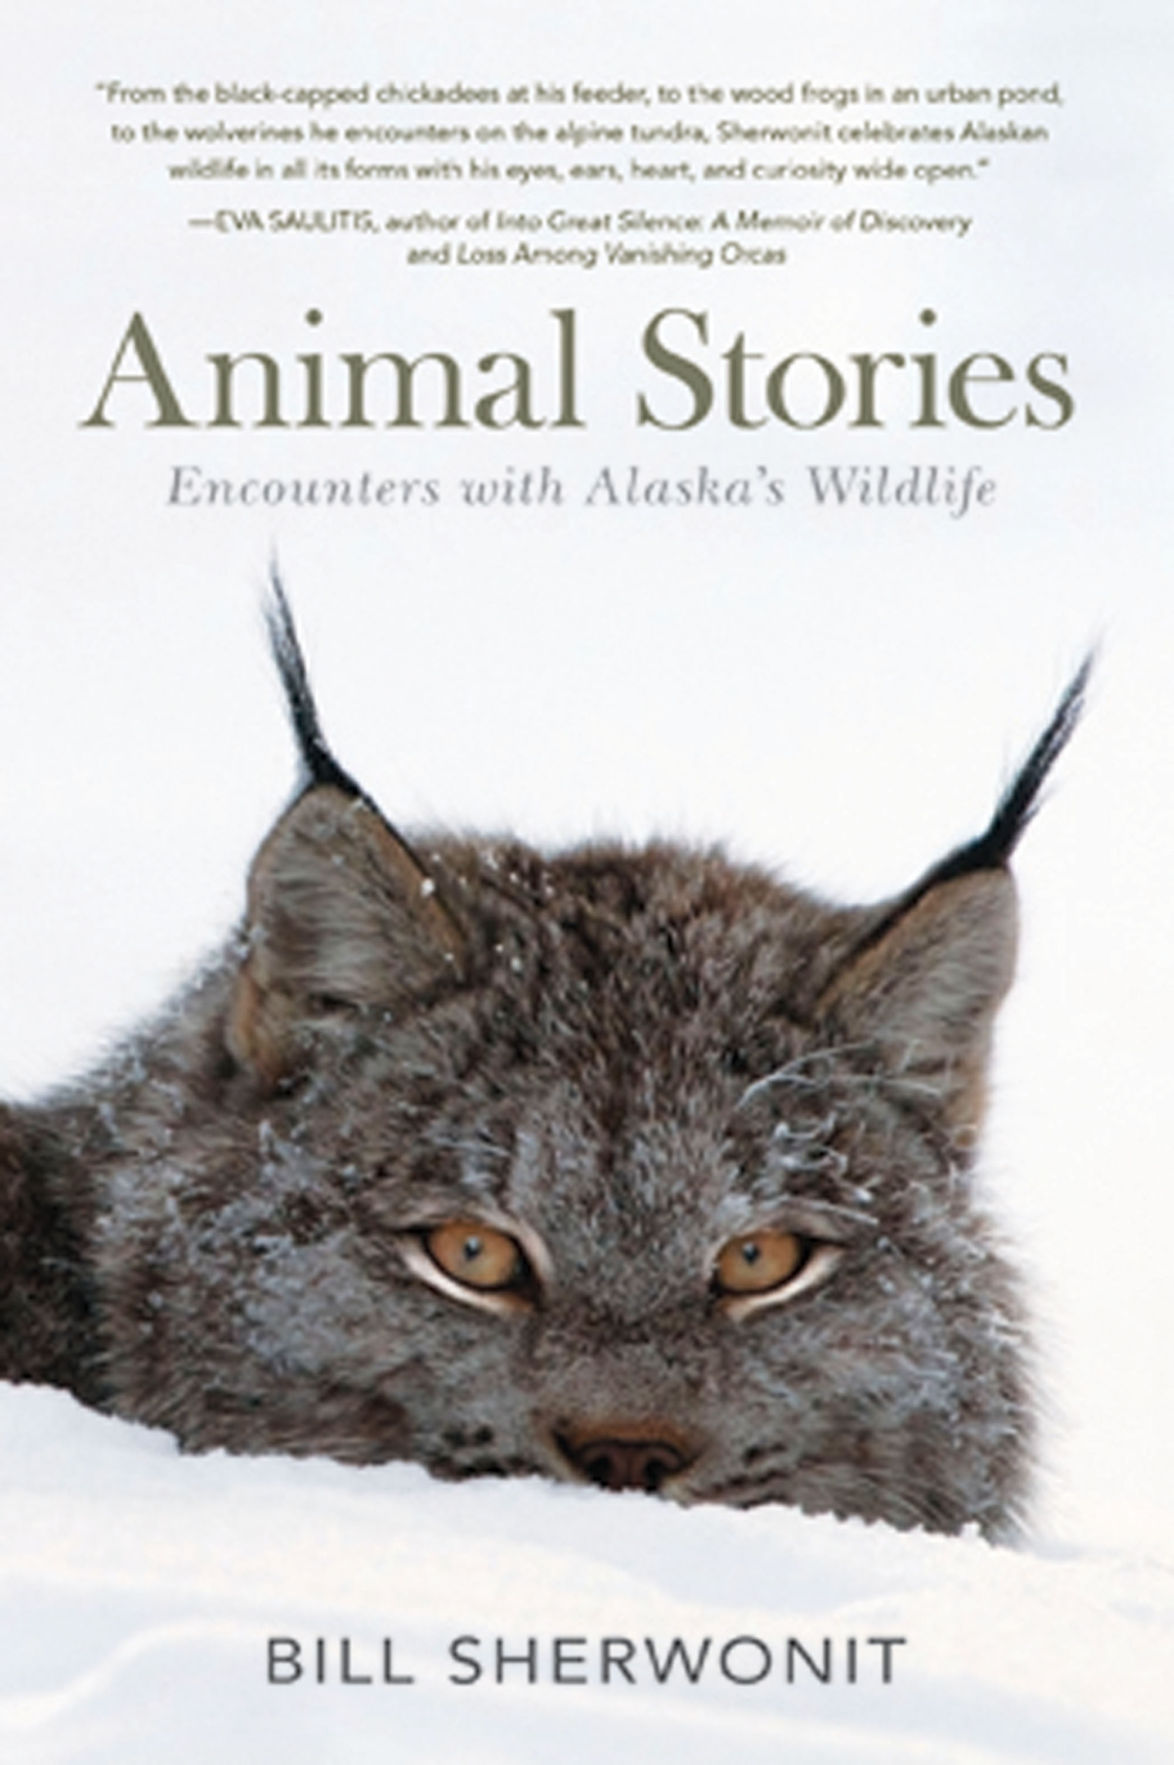 Book Features Stories About Interaction Of Animals And Men